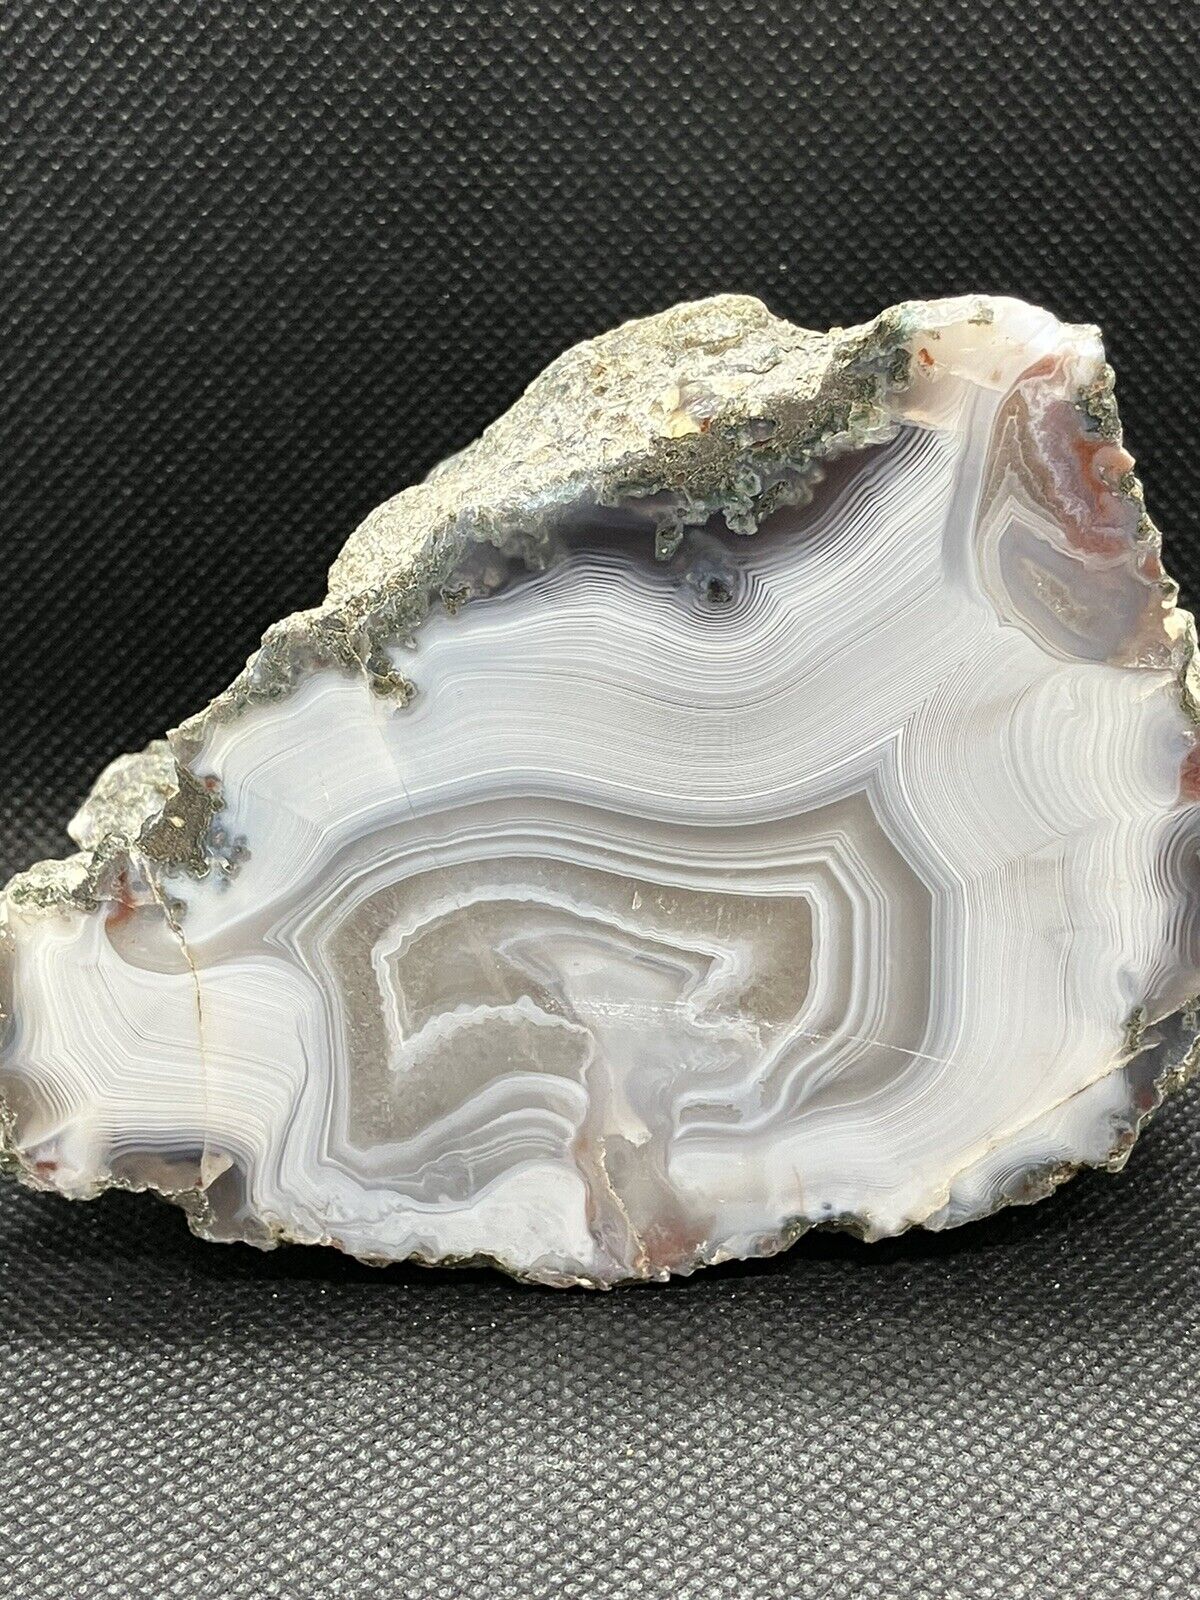 MOROCCAN AGATE FACE POLISHED SPECIMEN ( POLISHED) Stunning Parallax Banding